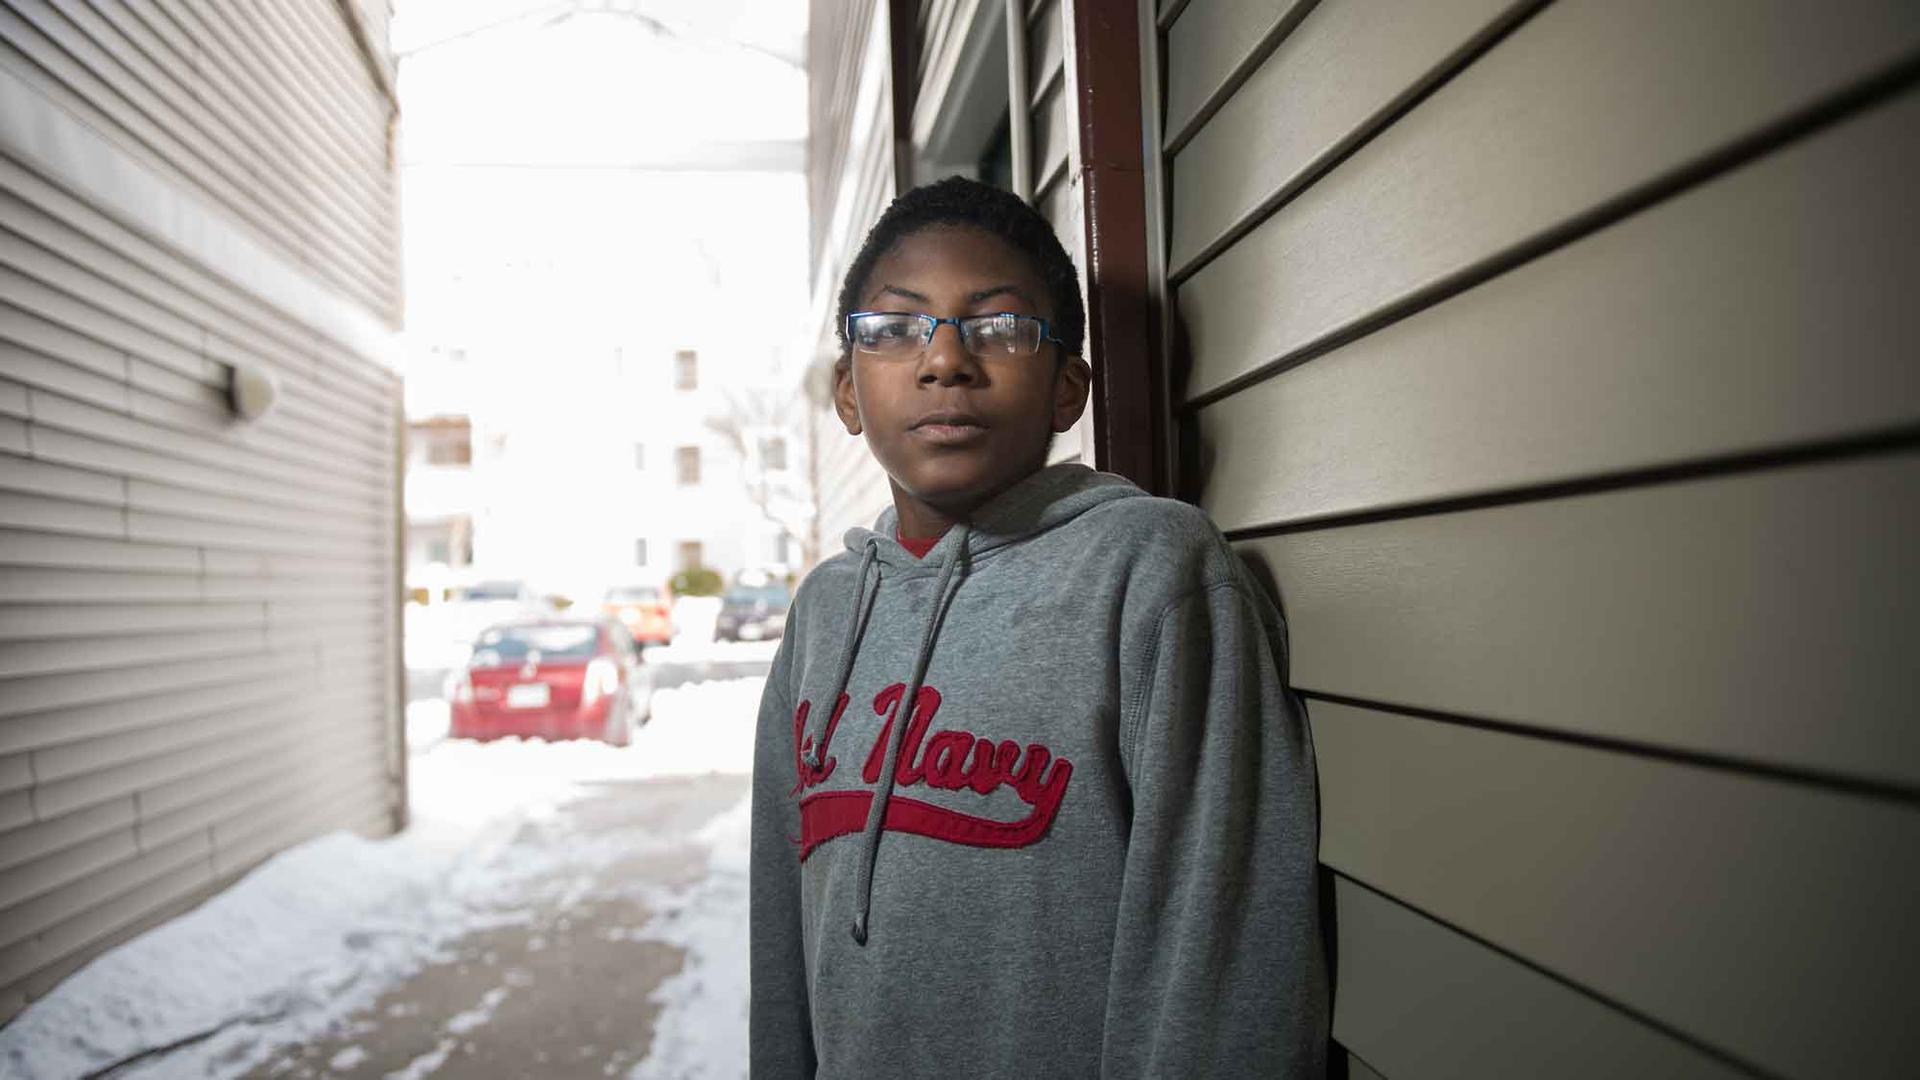 Kayleb Moon-Robinson — who is diagnosed as autistic — had barely started sixth grade last fall in Lynchburg, Virginia, when a school resource officer filed charges against him. Kayleb was charged with disorderly conduct for kicking over a trash can and th